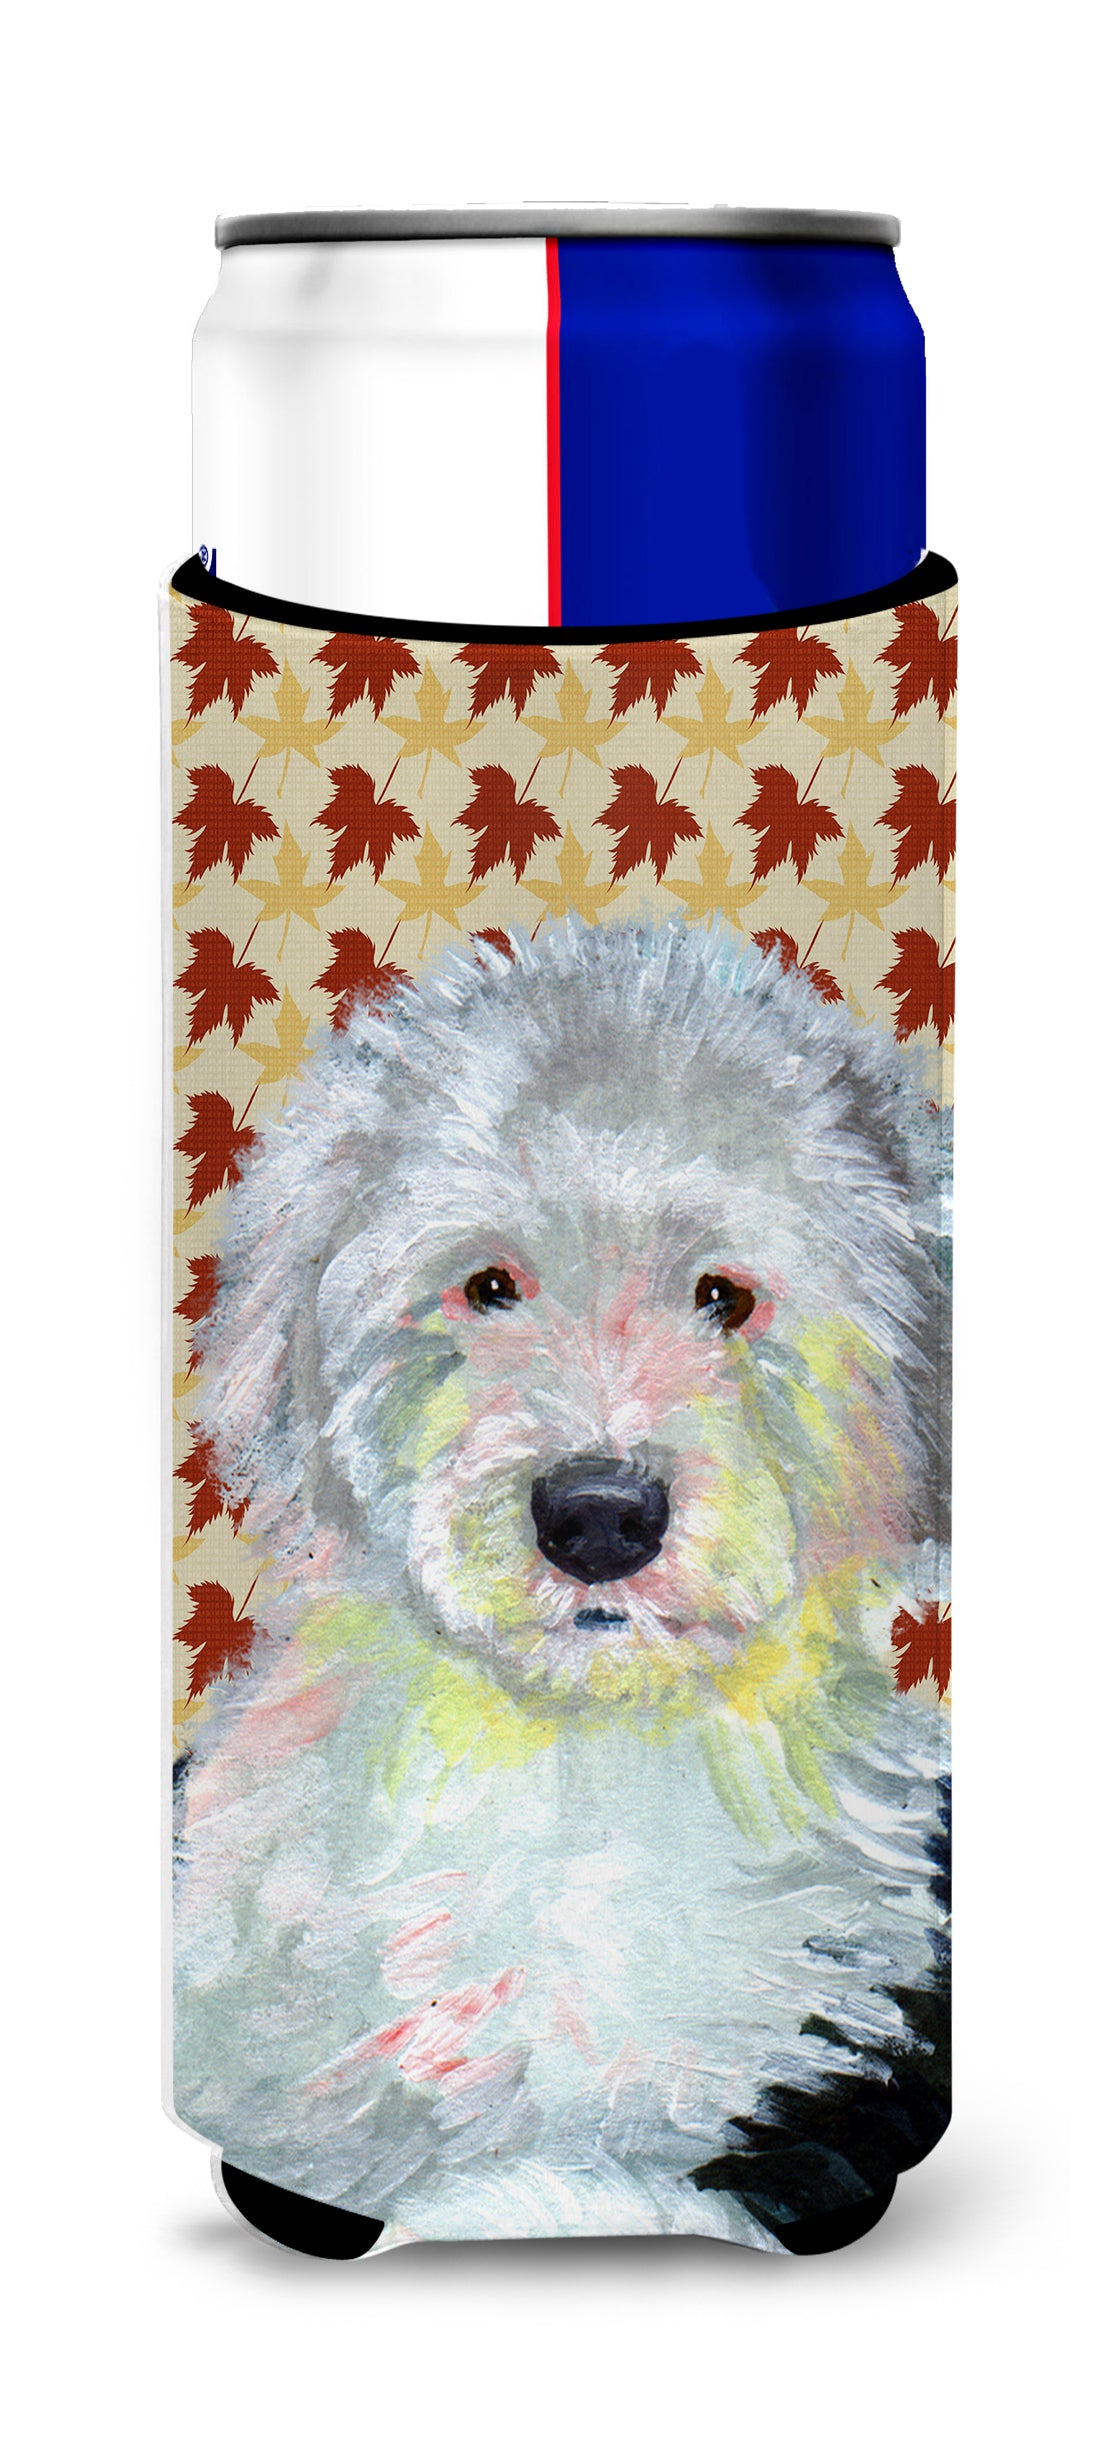 Old English Sheepdog Fall Leaves Portrait Ultra Beverage Insulators for slim cans LH9126MUK.